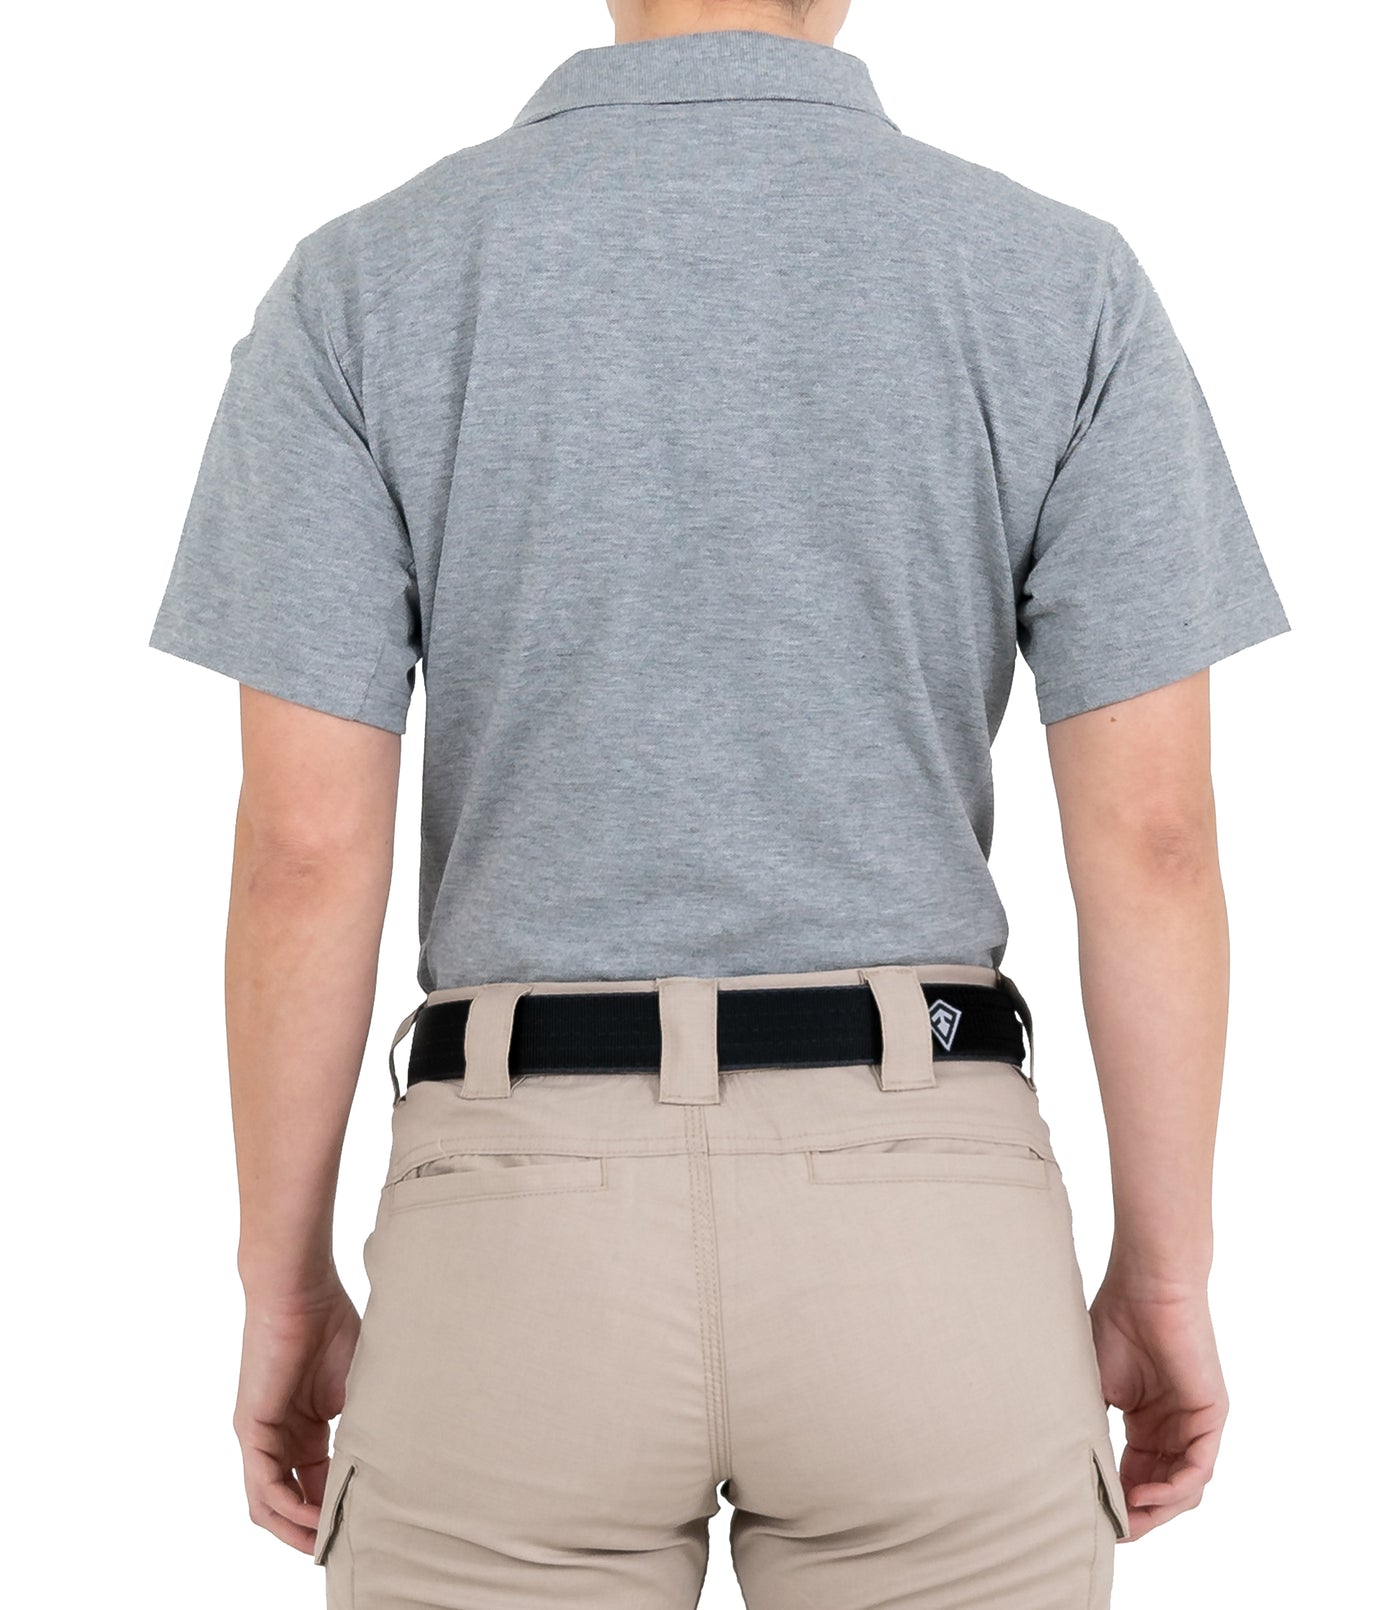 Back of Women's Cotton Short Sleeve Polo in Heather Grey